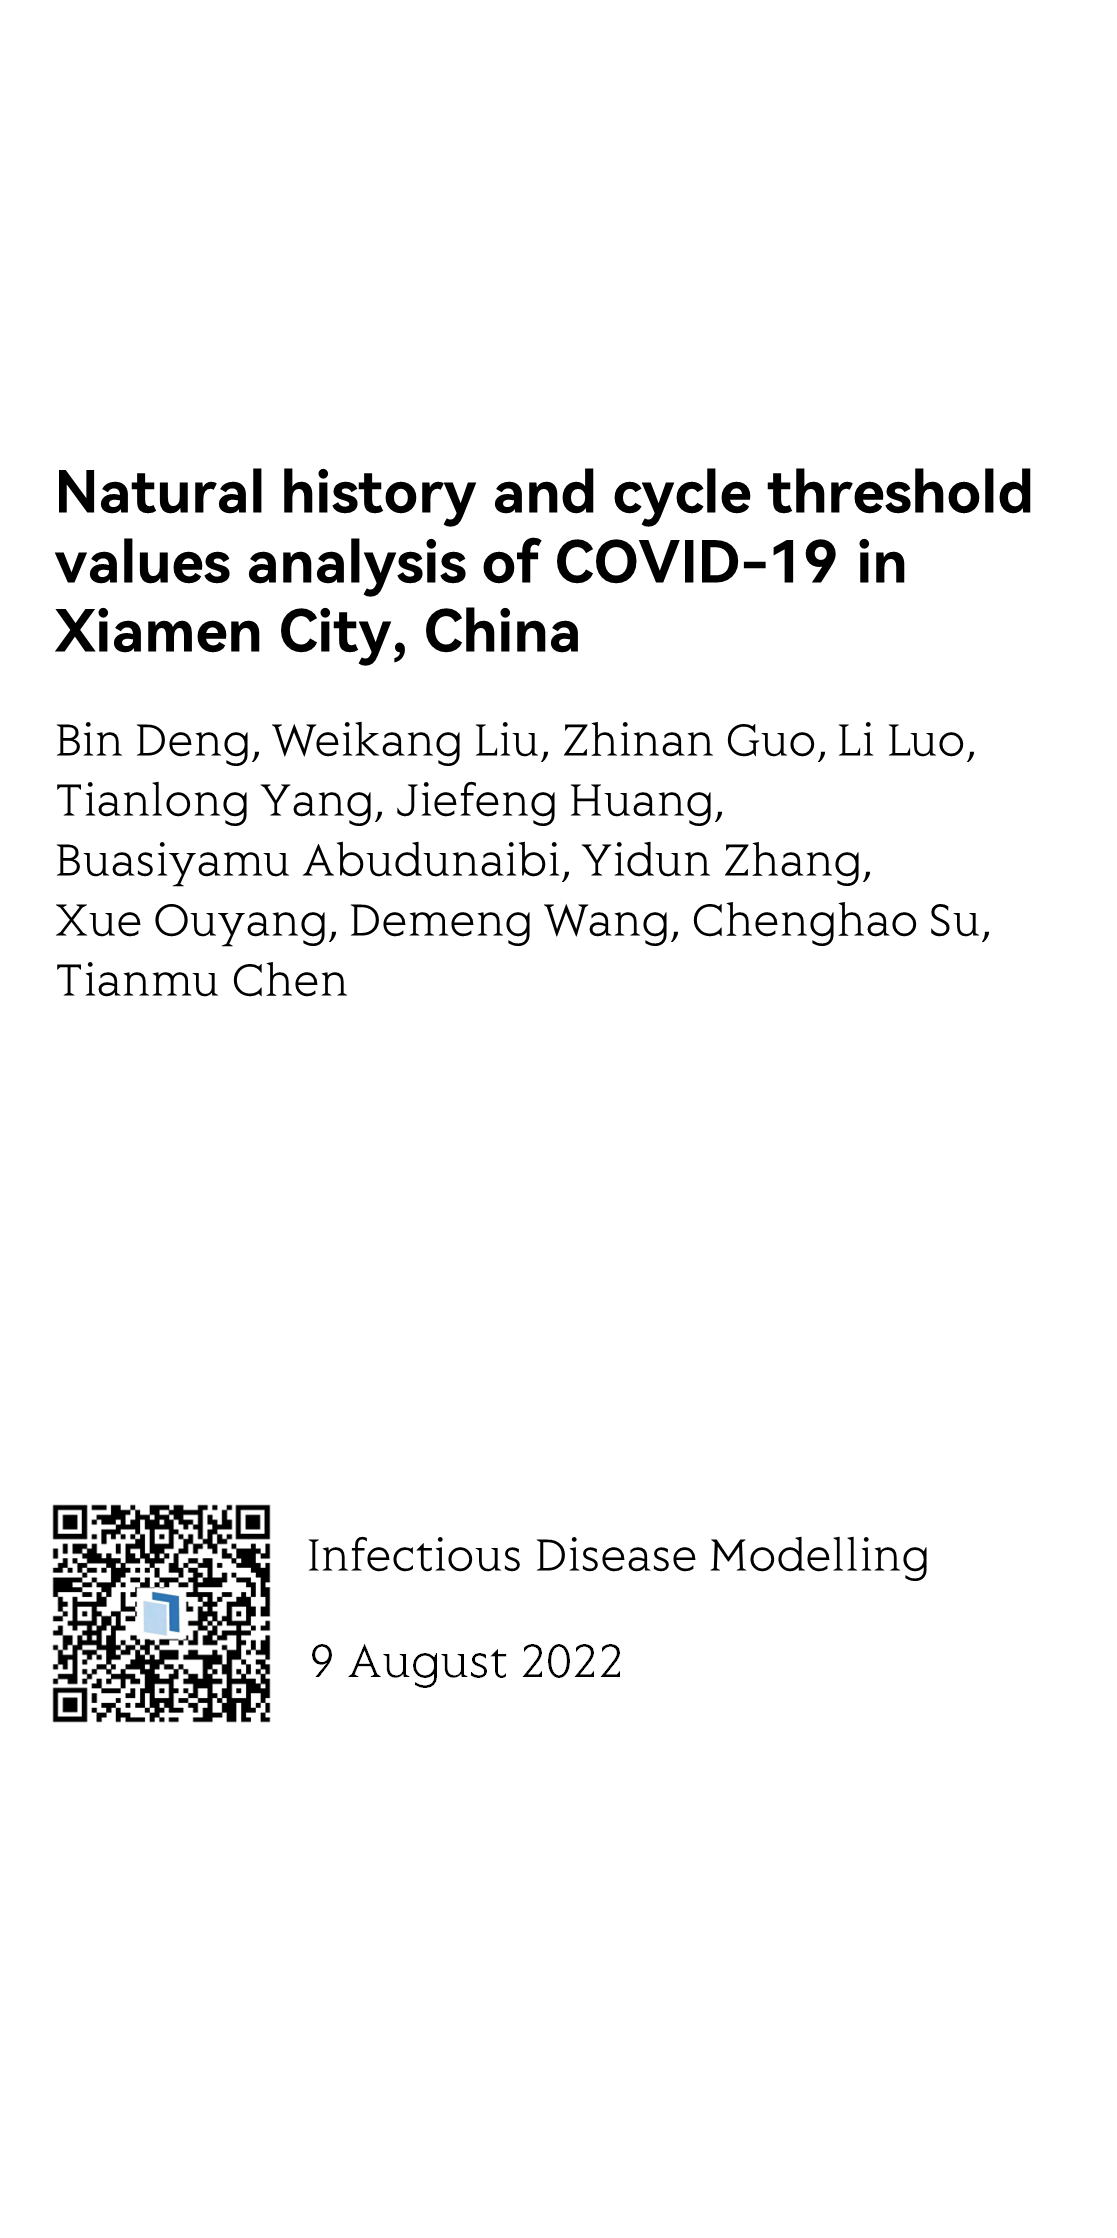 Infectious Disease Modelling_1